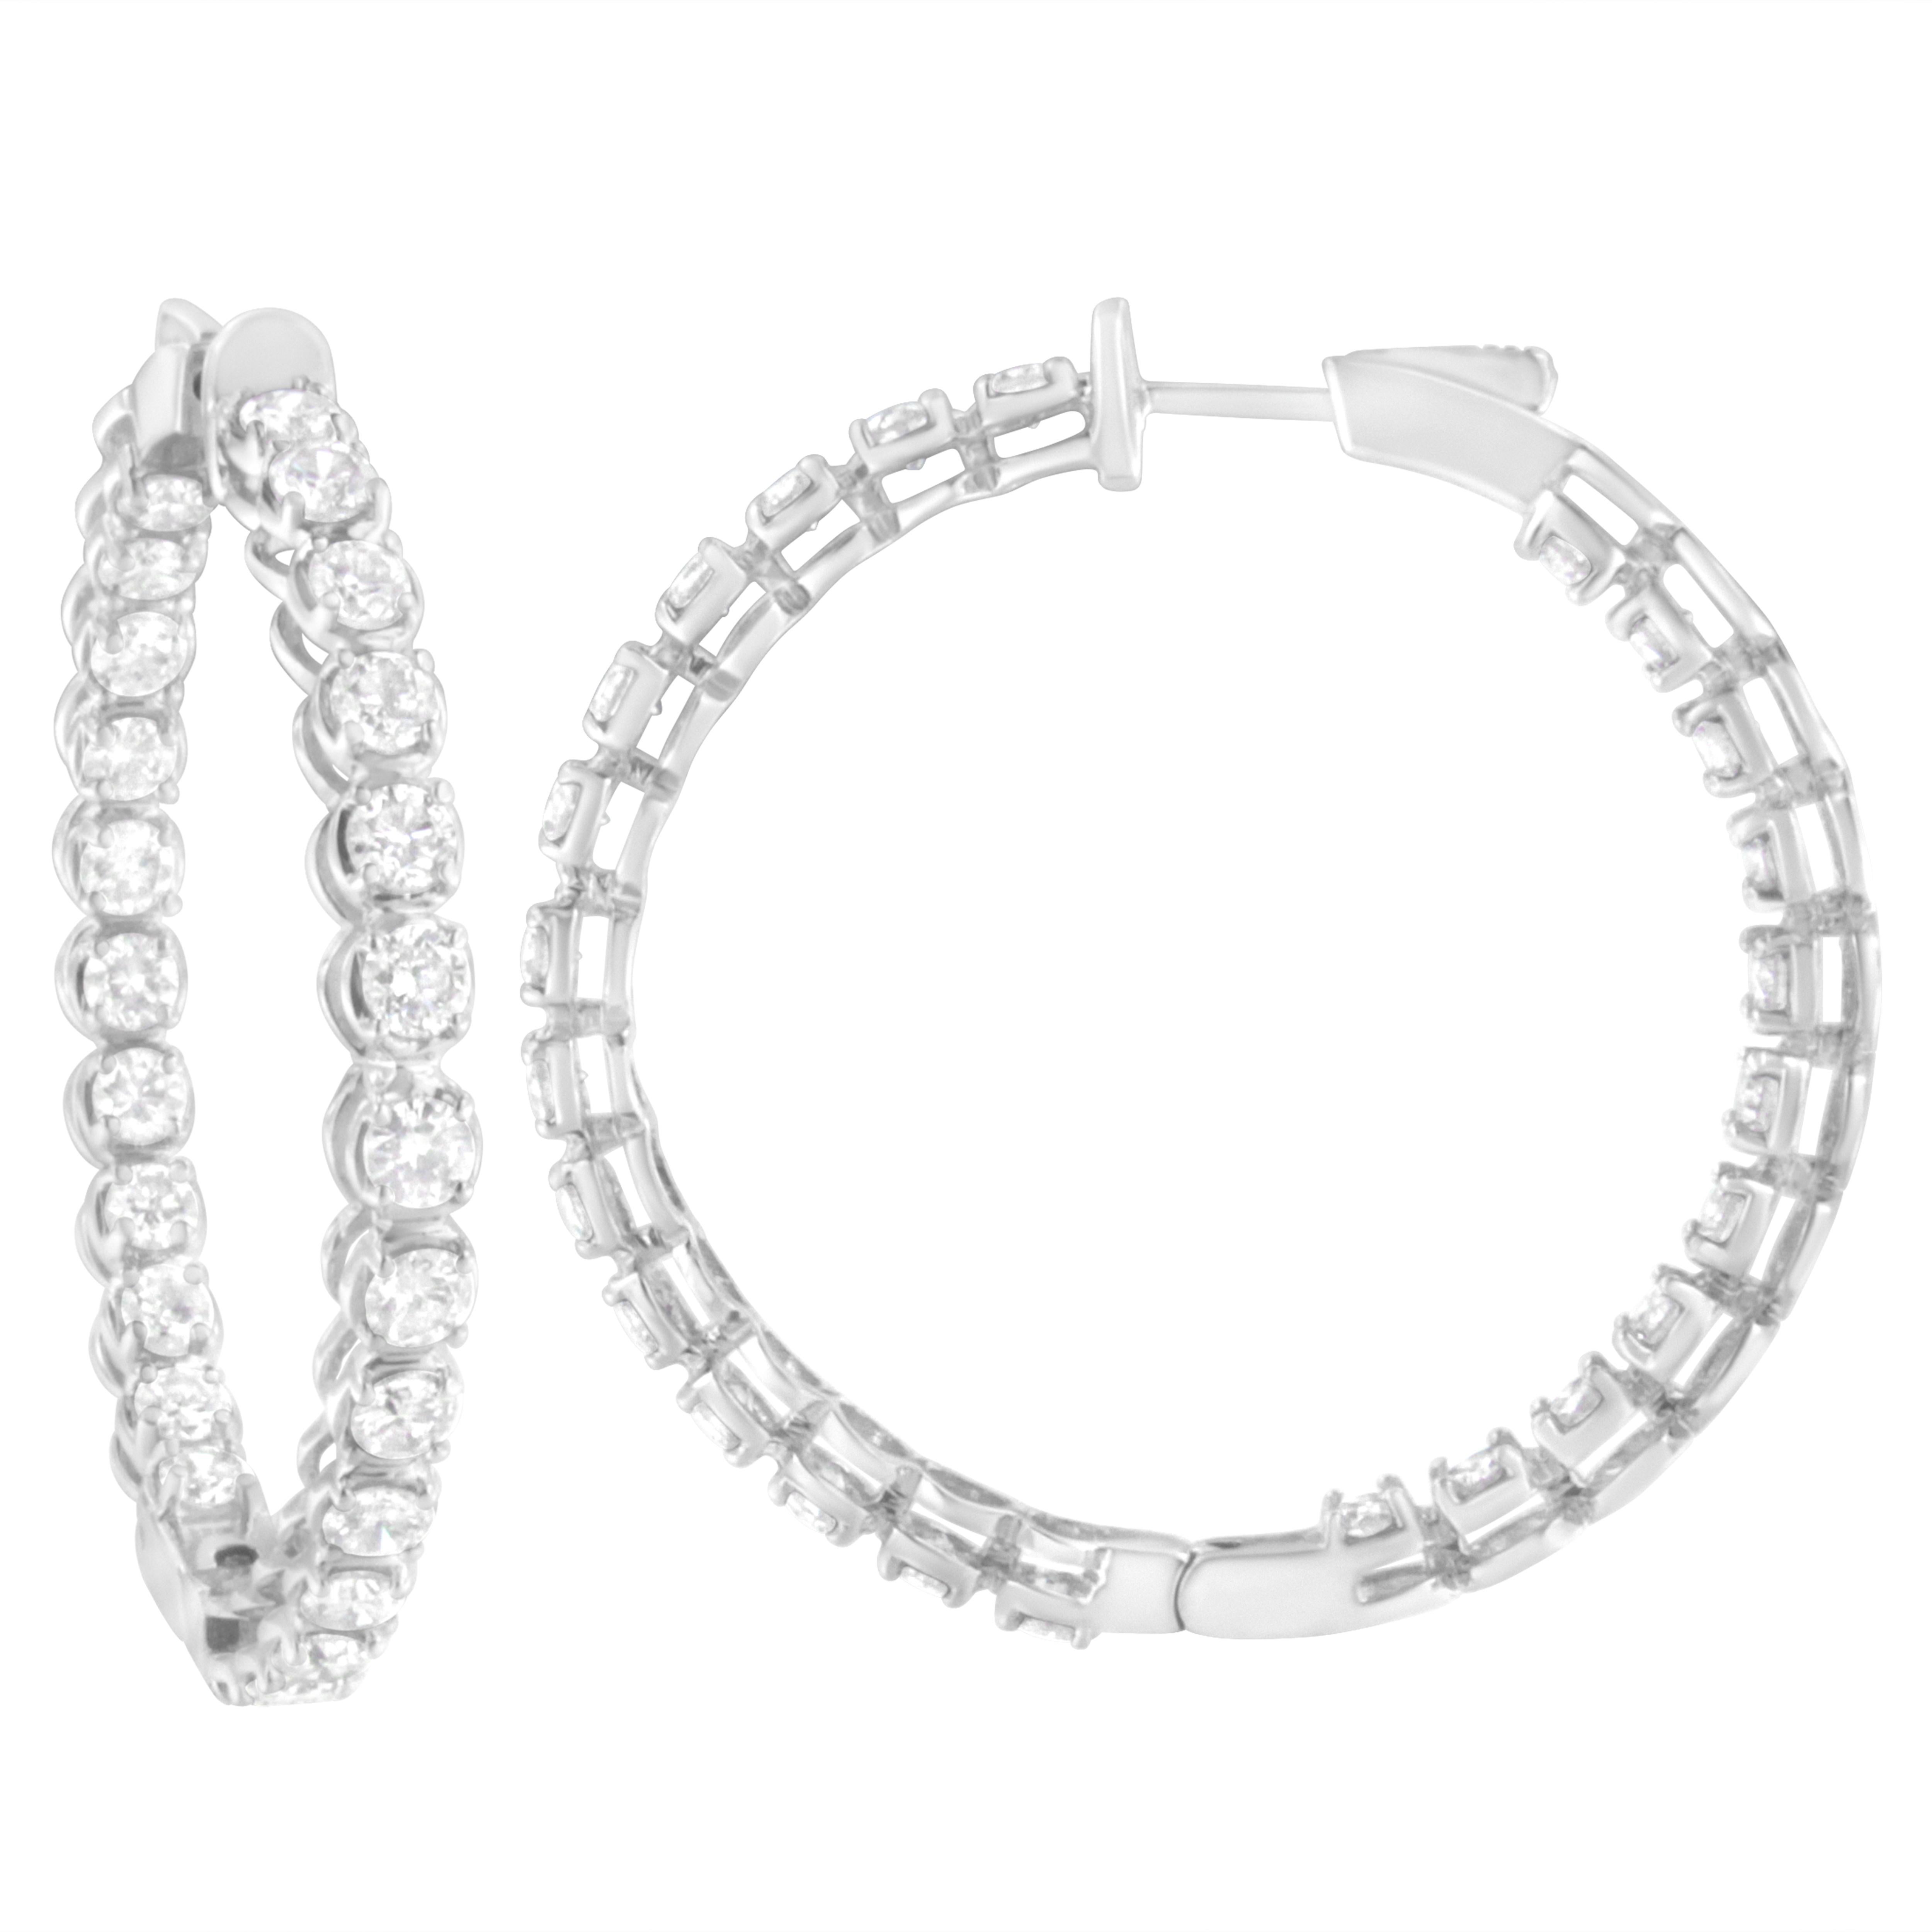 A classic statement hoop earring with a unique inside-out diamond design set in the finest .925 sterling silver. This gorgeous piece has 50 natural, round-cut diamonds in a prong setting for a total of 7 ct. These natural diamonds are color rated as